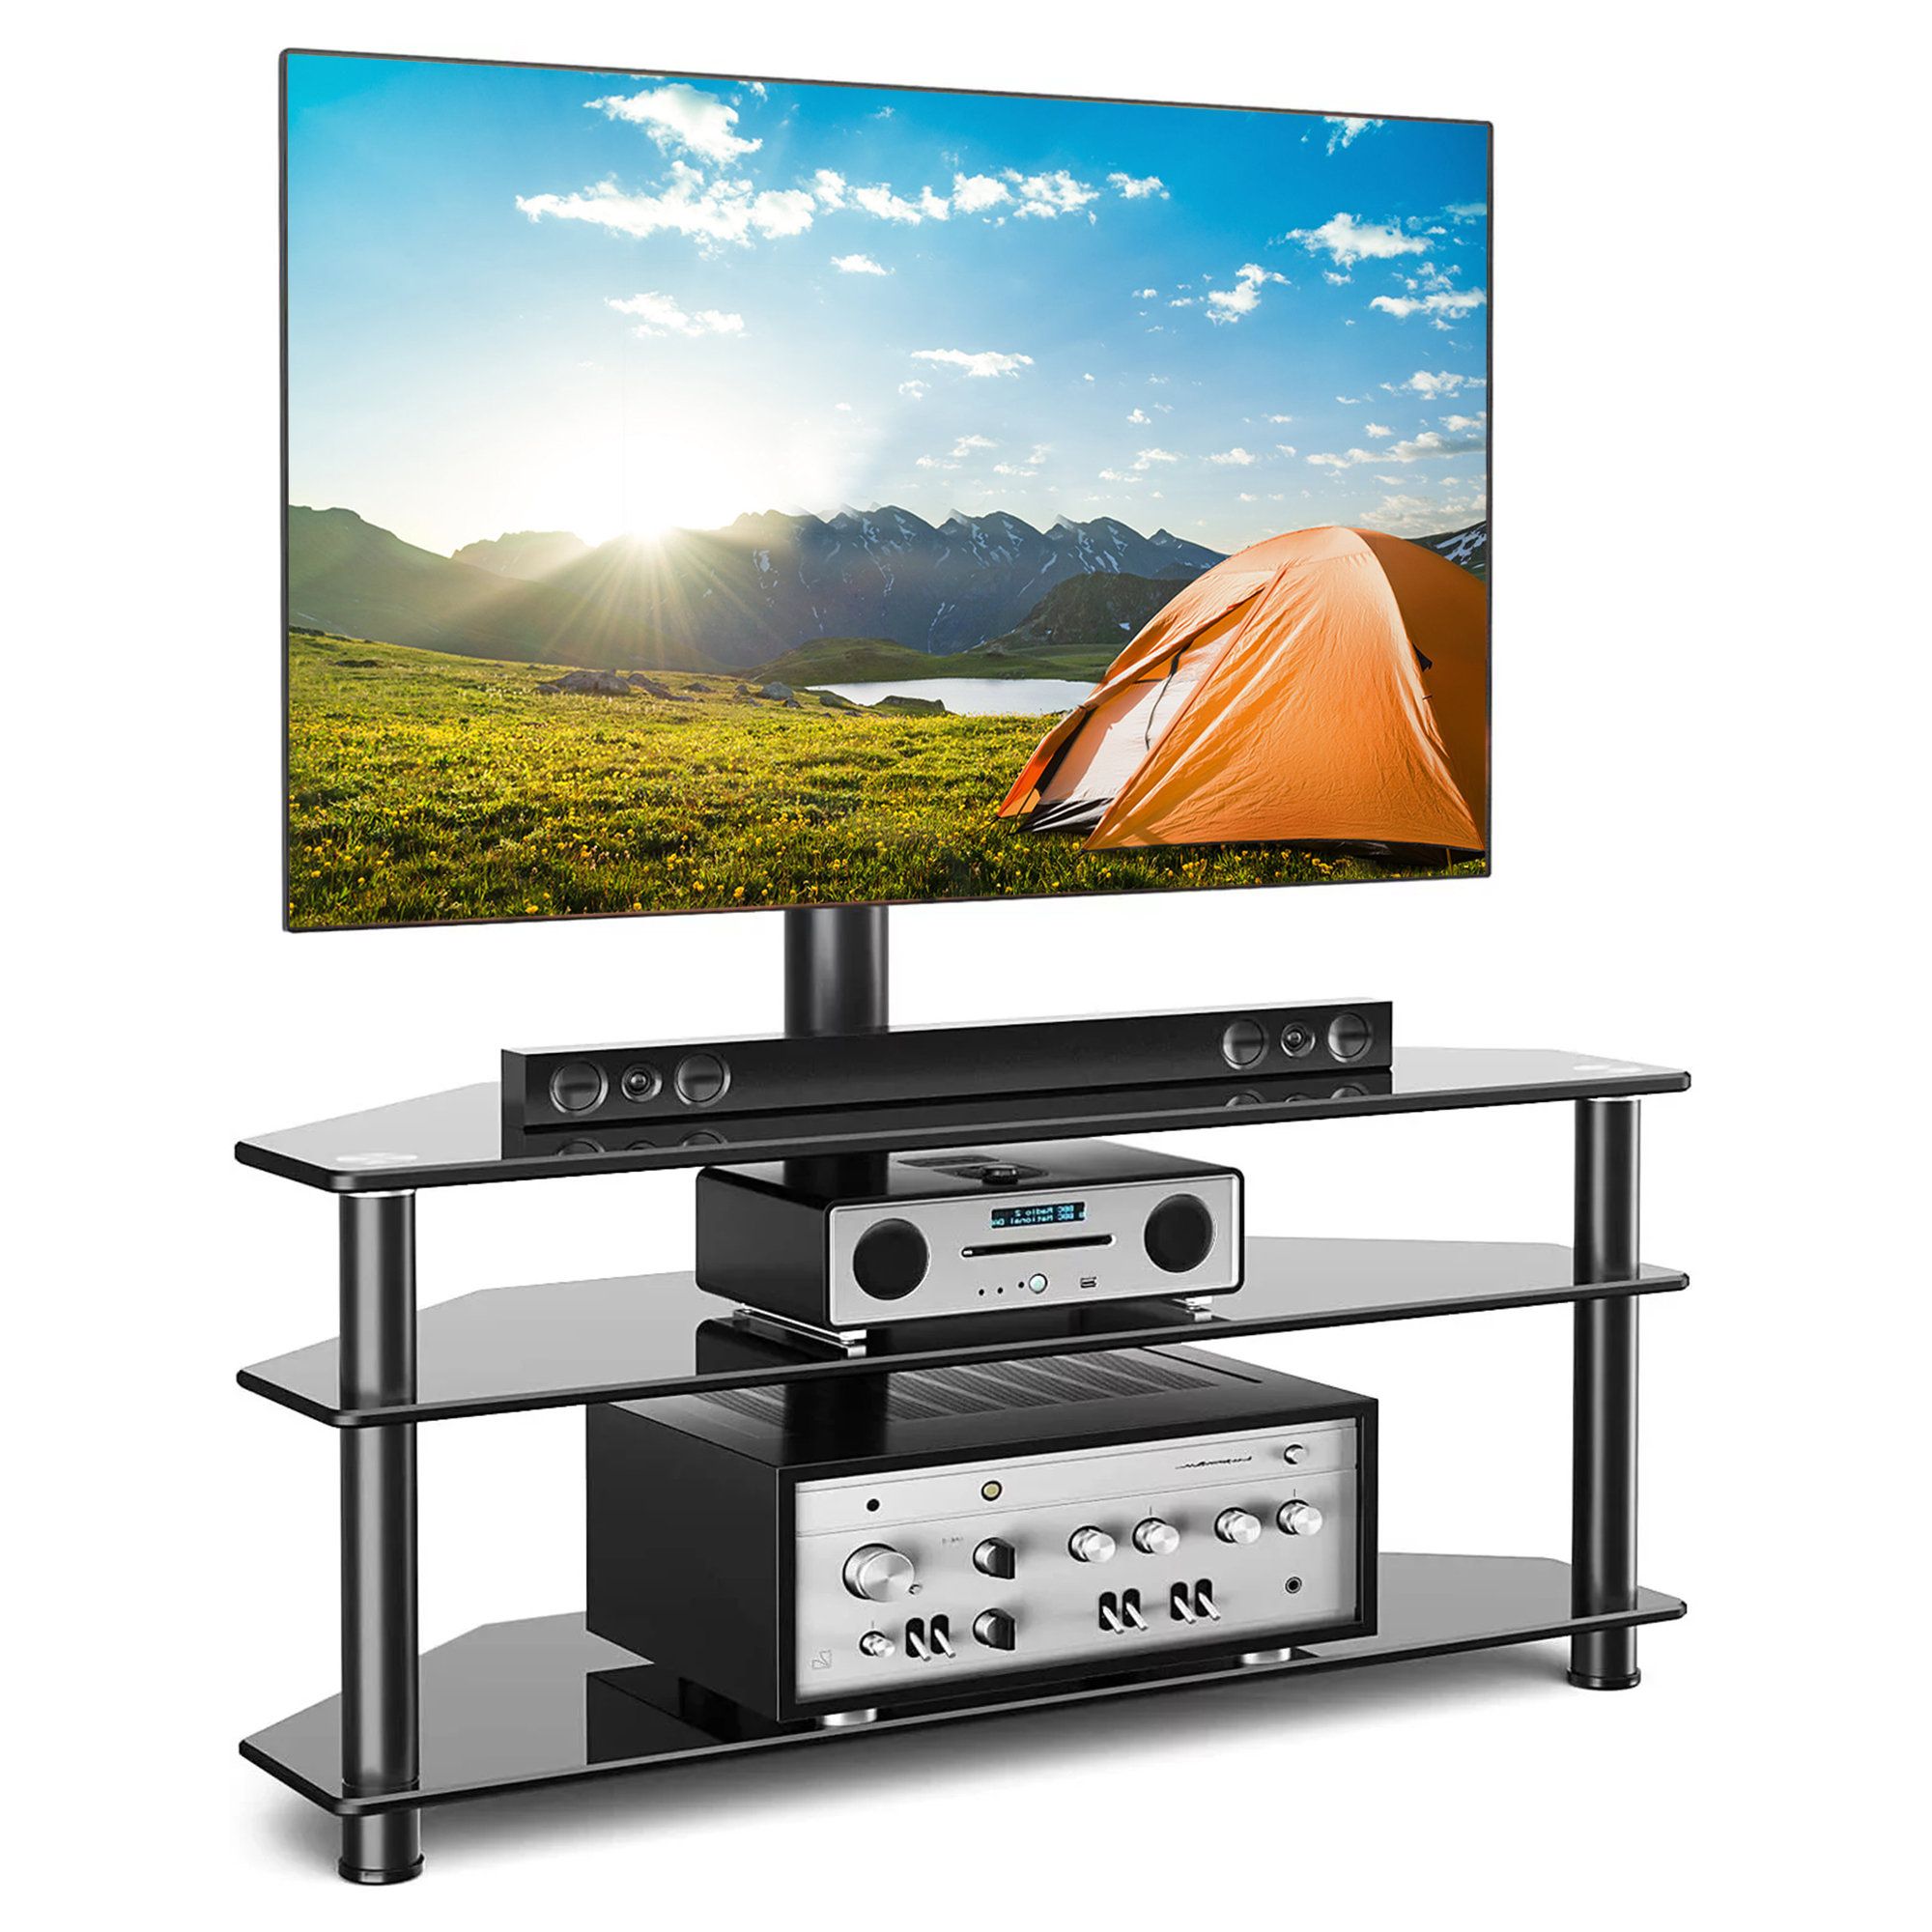 Symple Stuff Dmitrijus 3 Tier Multi Function Tv Stand For 32 65 Inch Tvs |  Wayfair Intended For Tier Stands For Tvs (View 7 of 15)